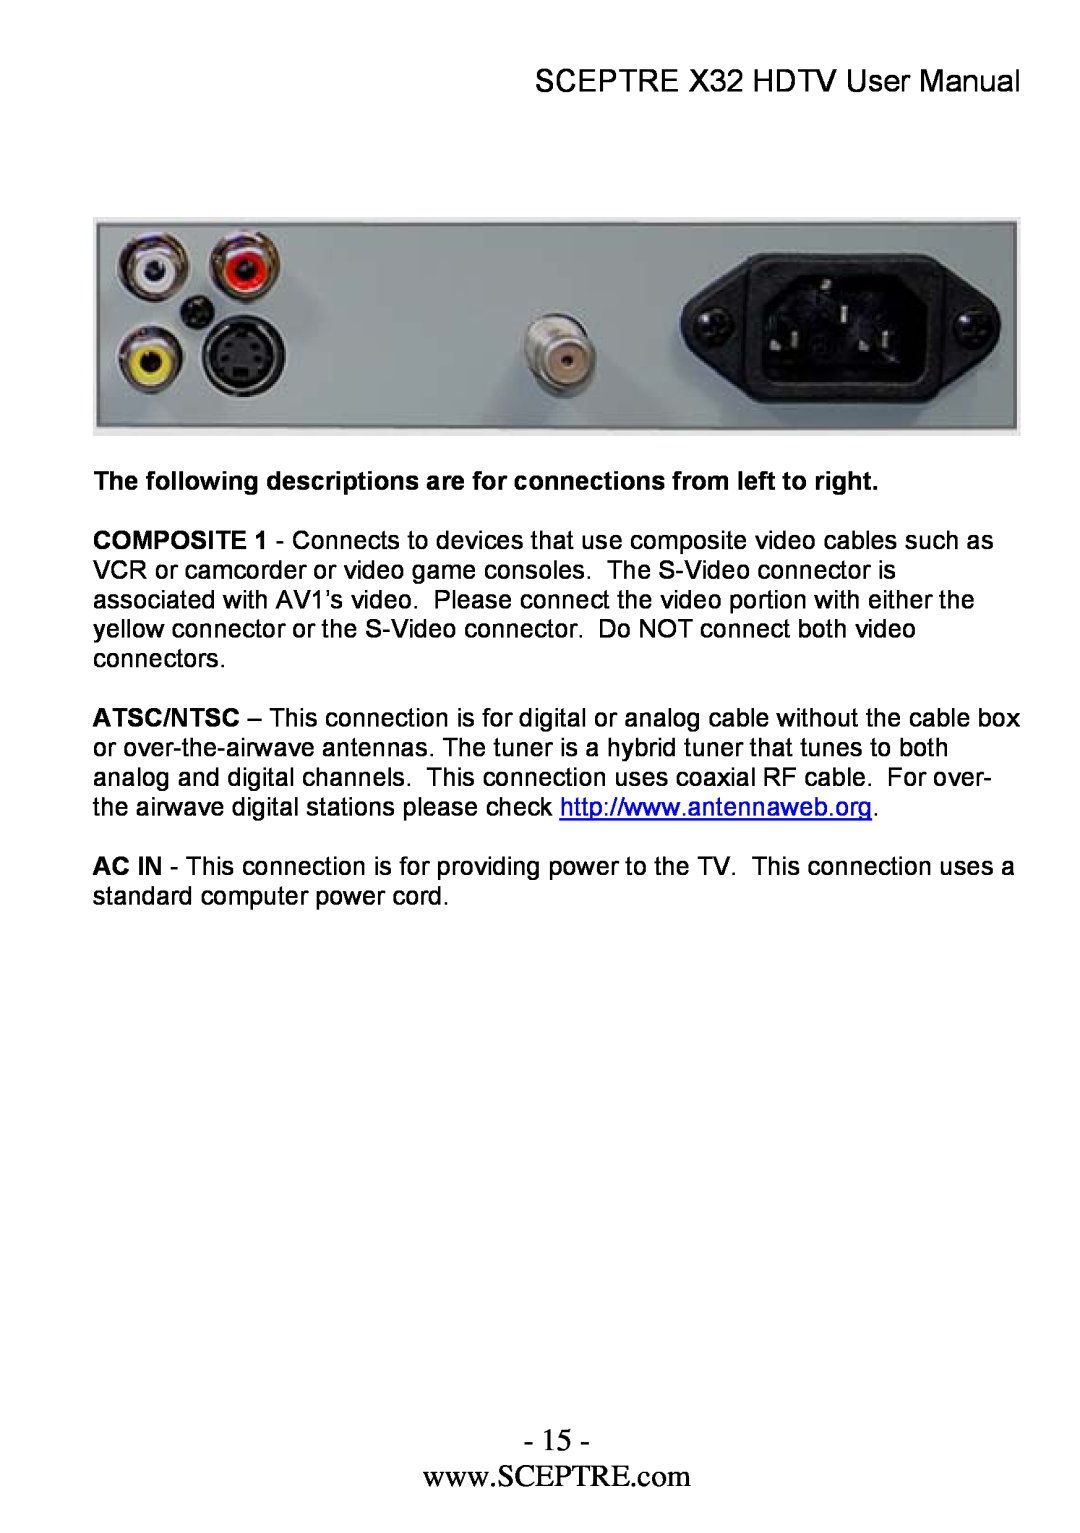 Sceptre Technologies x32 SCEPTRE X32 HDTV User Manual, The following descriptions are for connections from left to right 